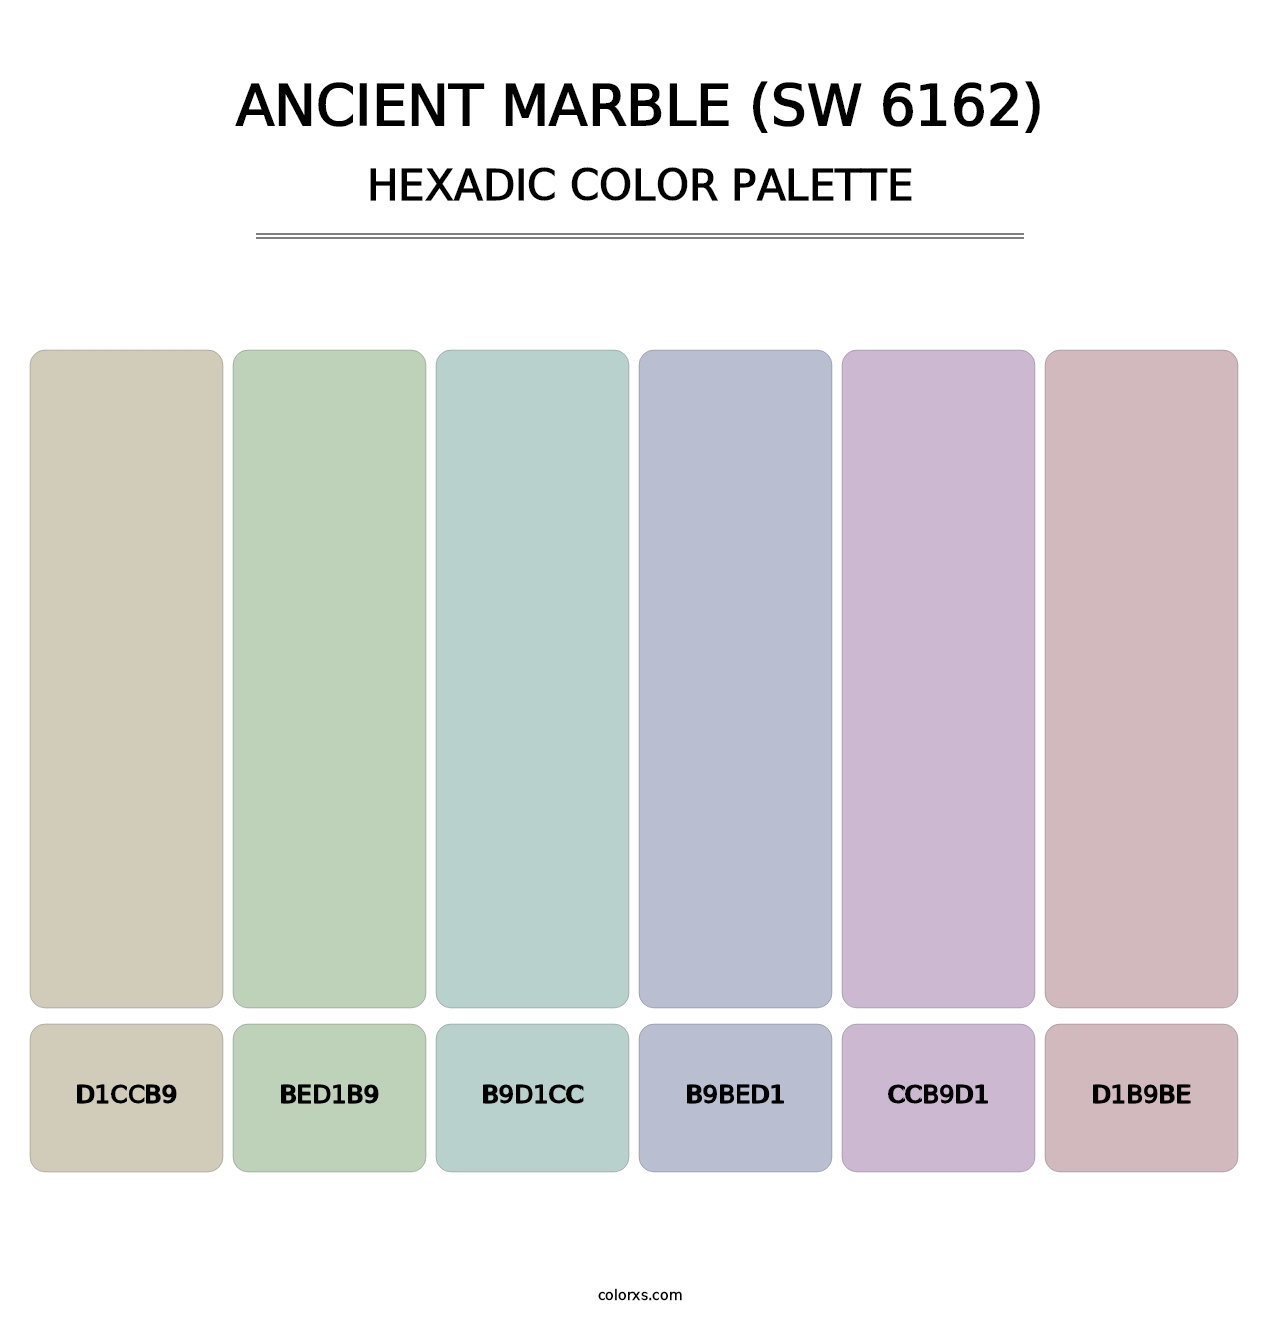 Ancient Marble (SW 6162) - Hexadic Color Palette